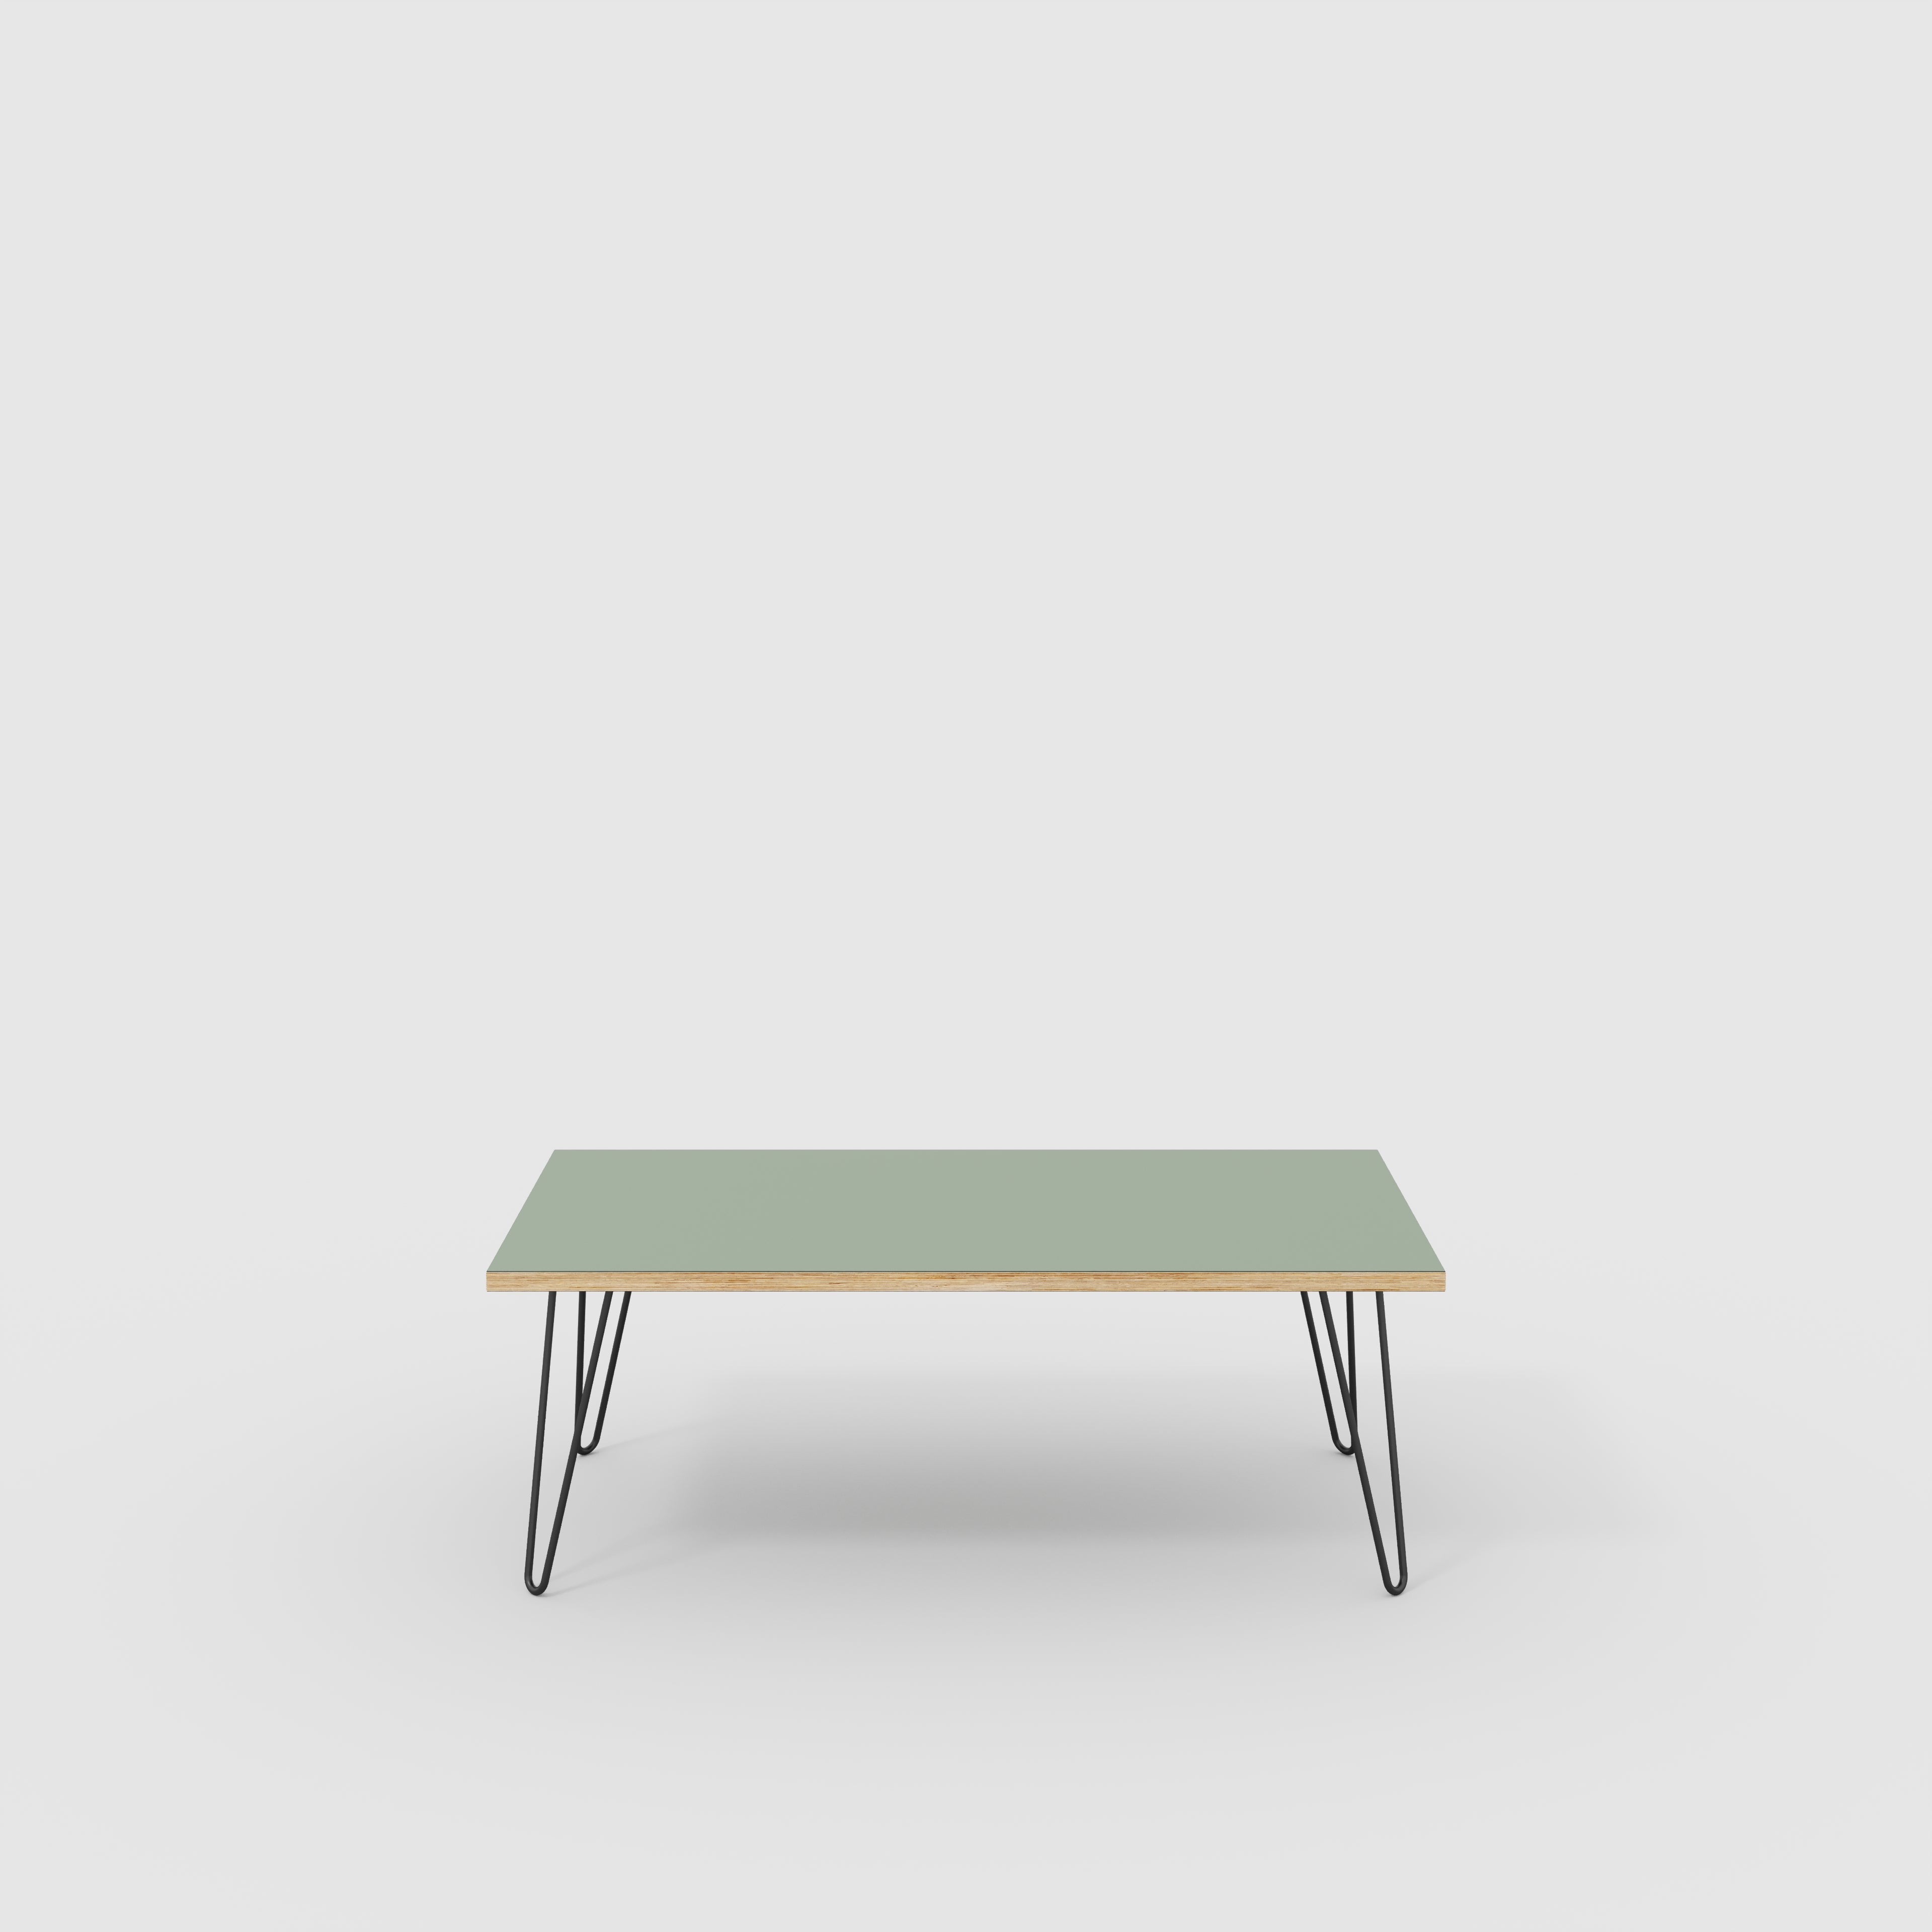 Coffee Table with Black Hairpin Legs - Formica Green Slate - 1200(w) x 600(d) x 425(h)